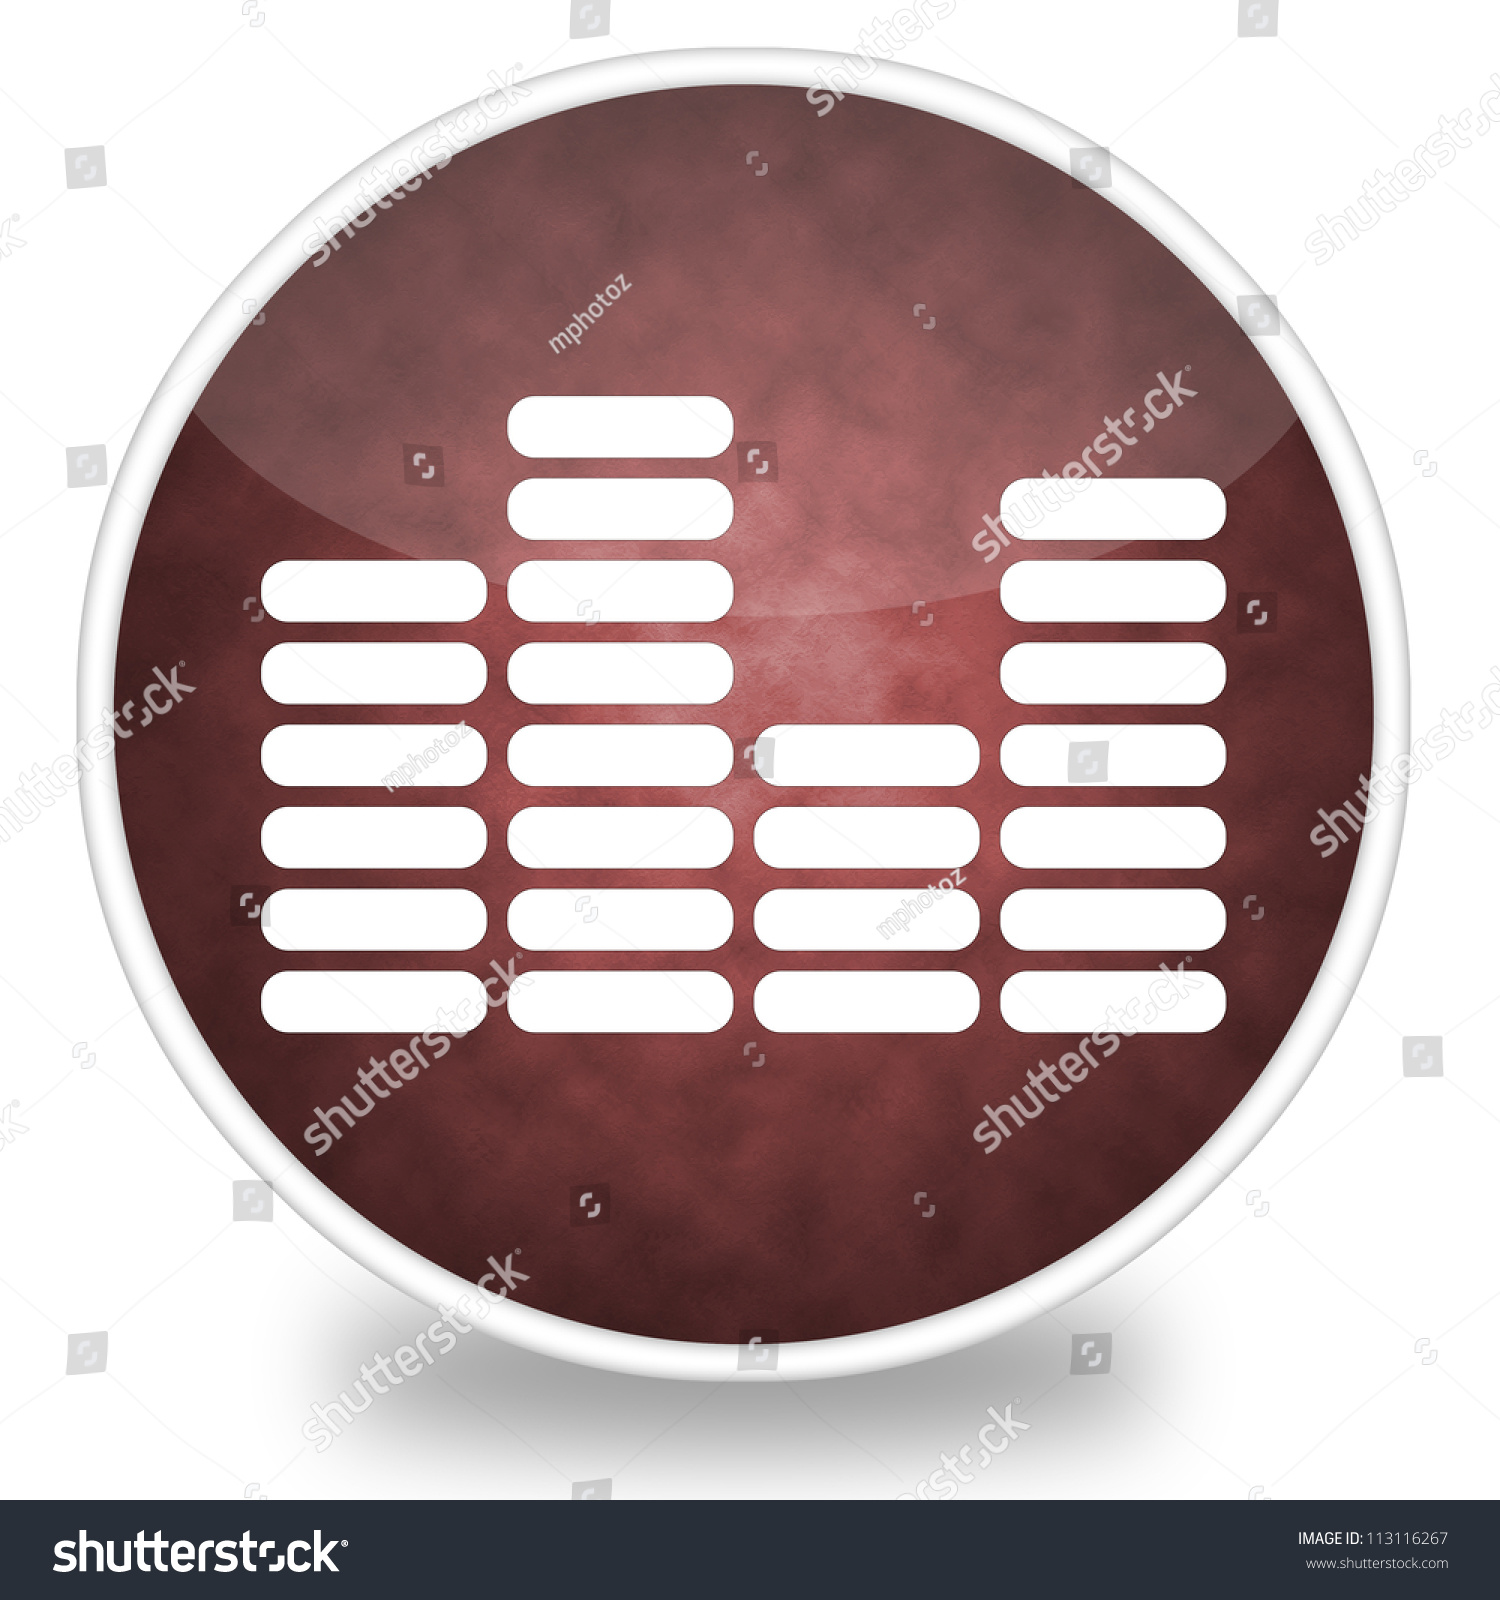 Image Of Sound Icon Stock Photo 113116267 : Shutterstock